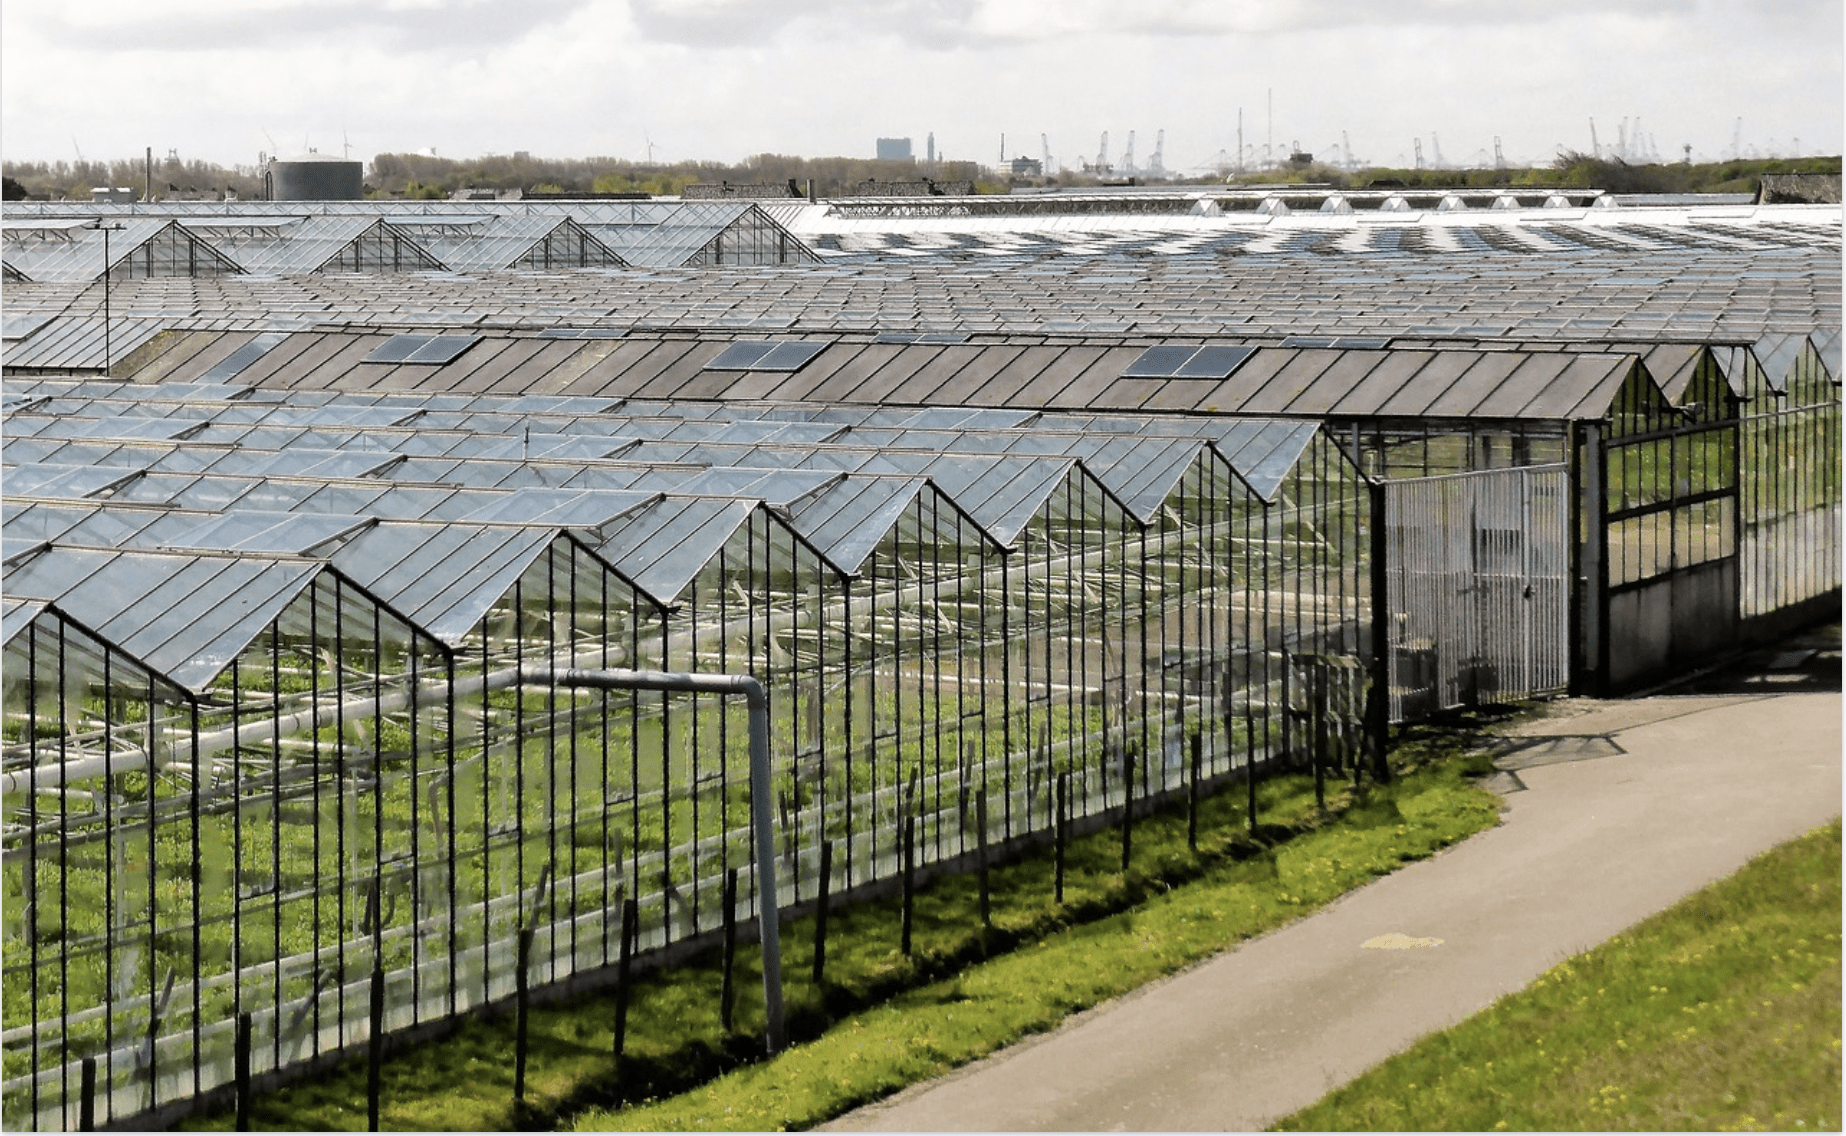 Greenhouse horticulture without gas? In search of even more innovation!